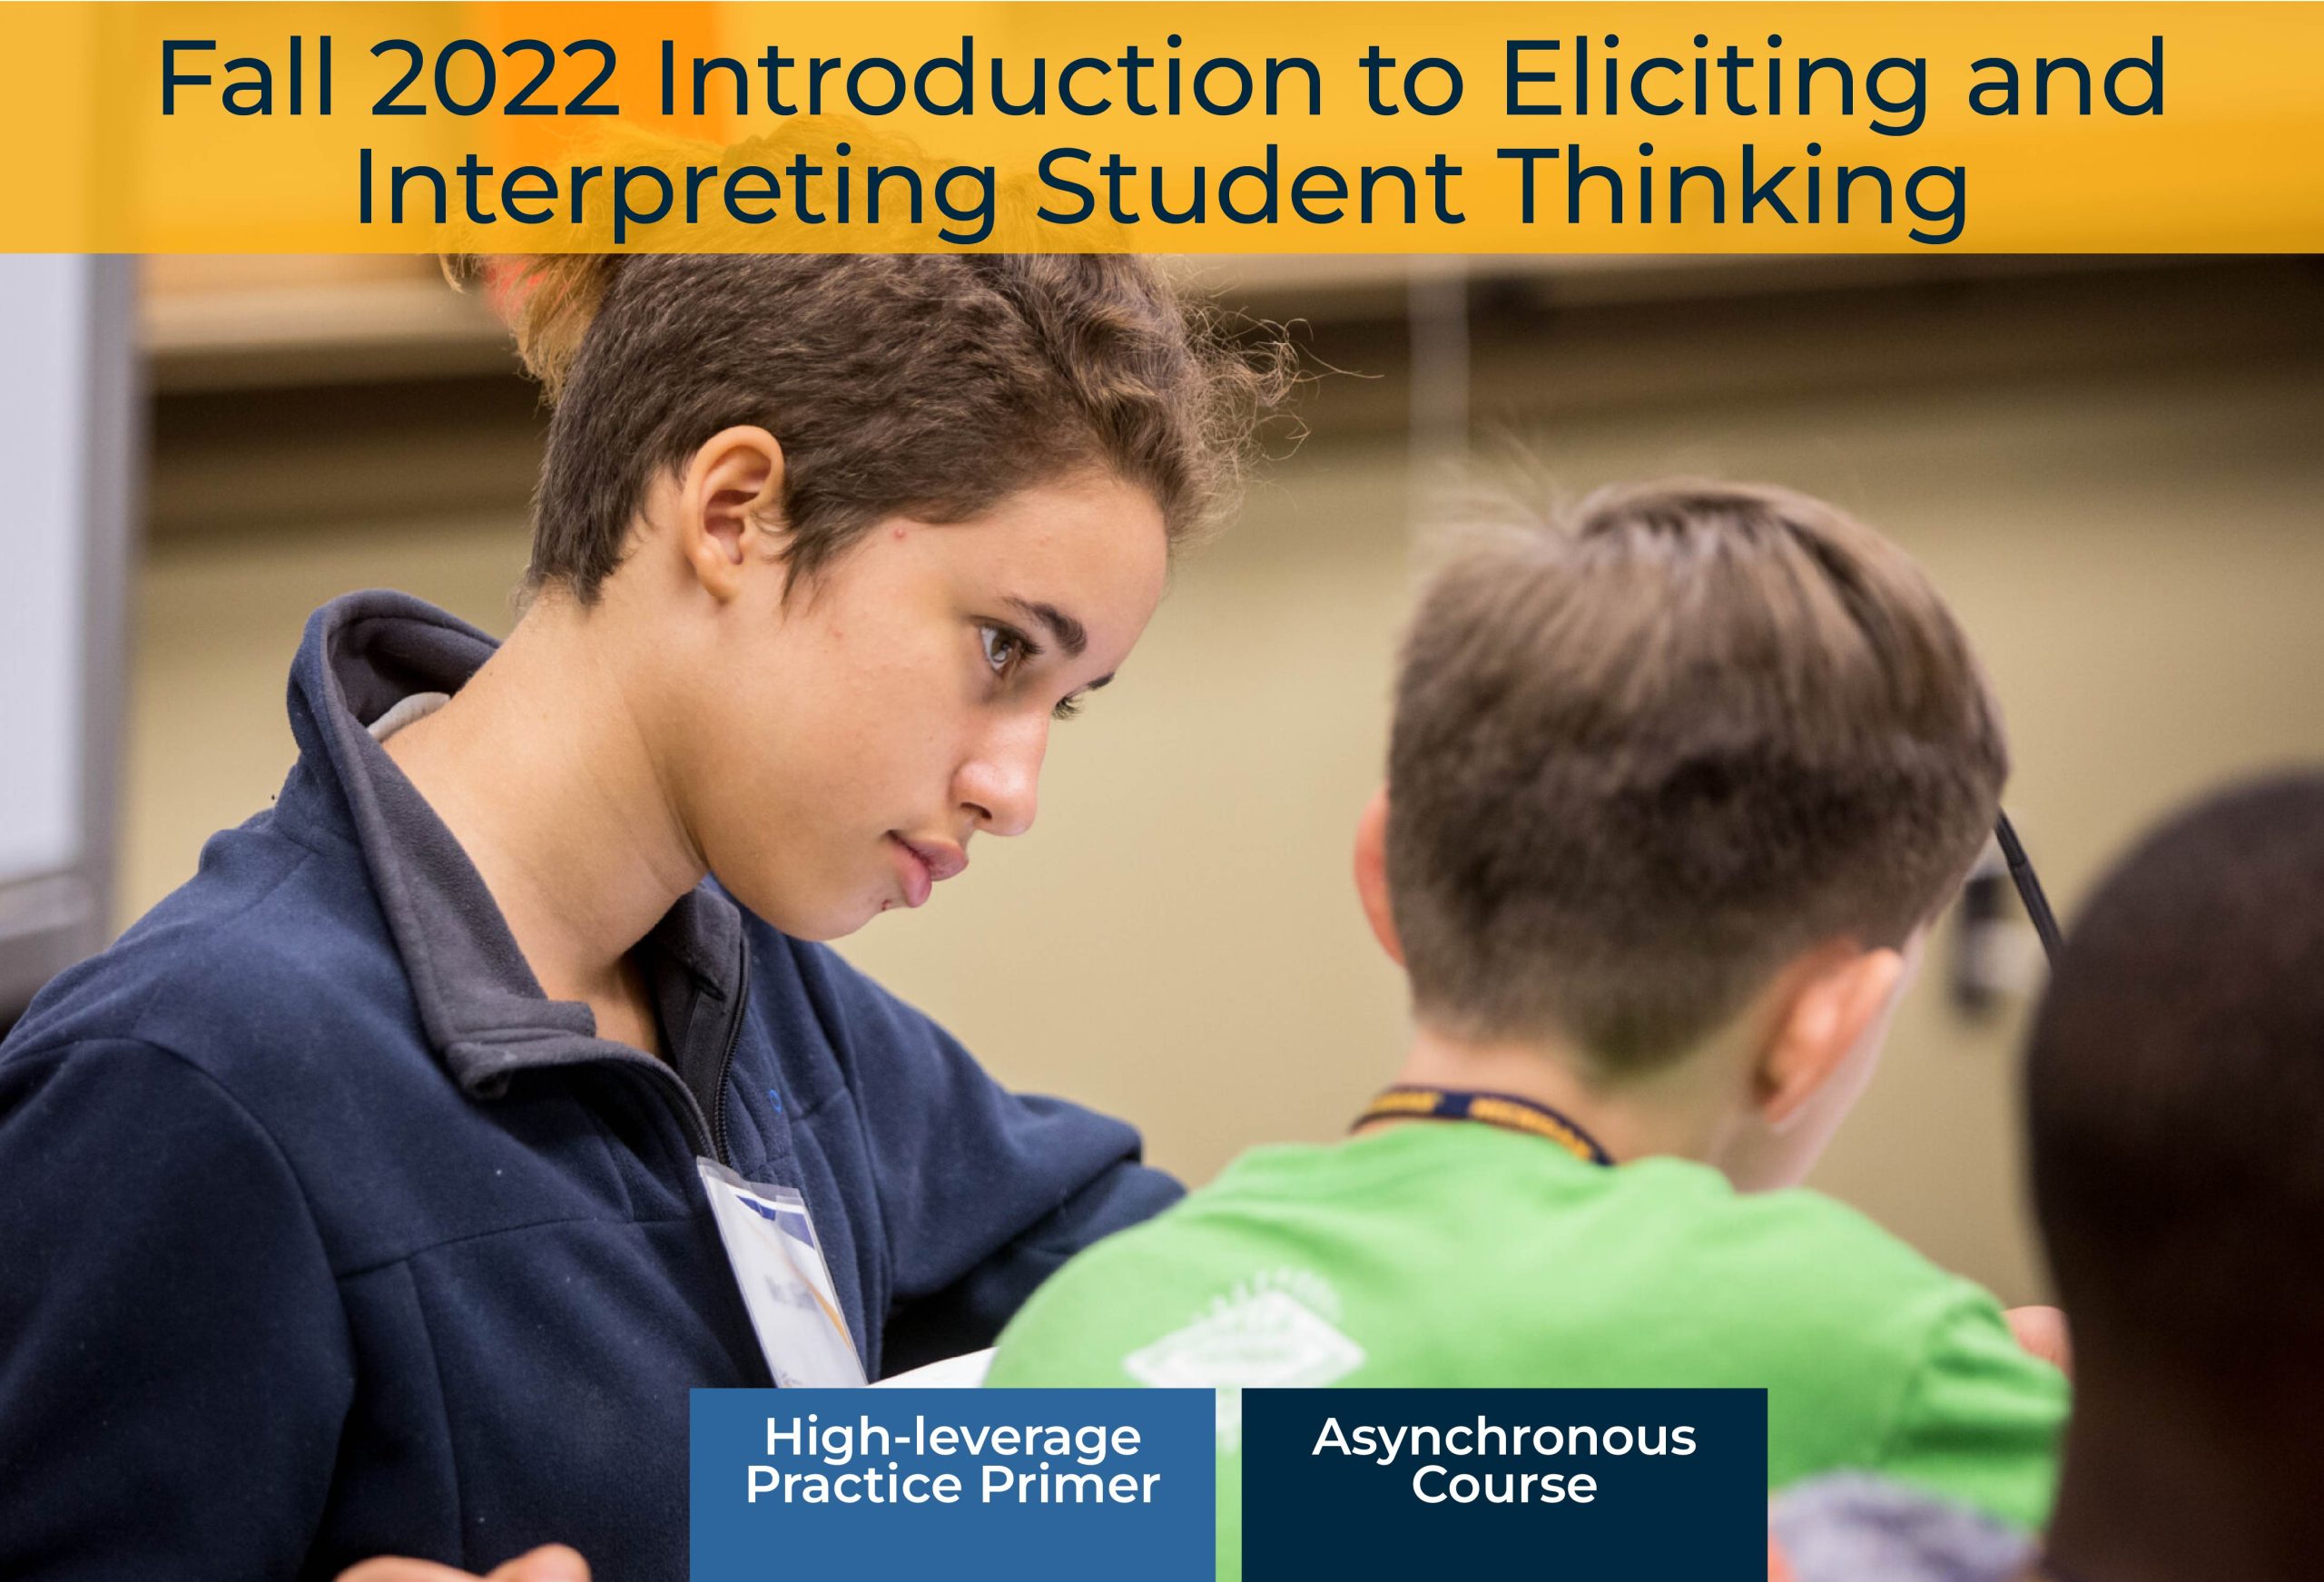 Introduction to Eliciting and Interpreting Student Thinking